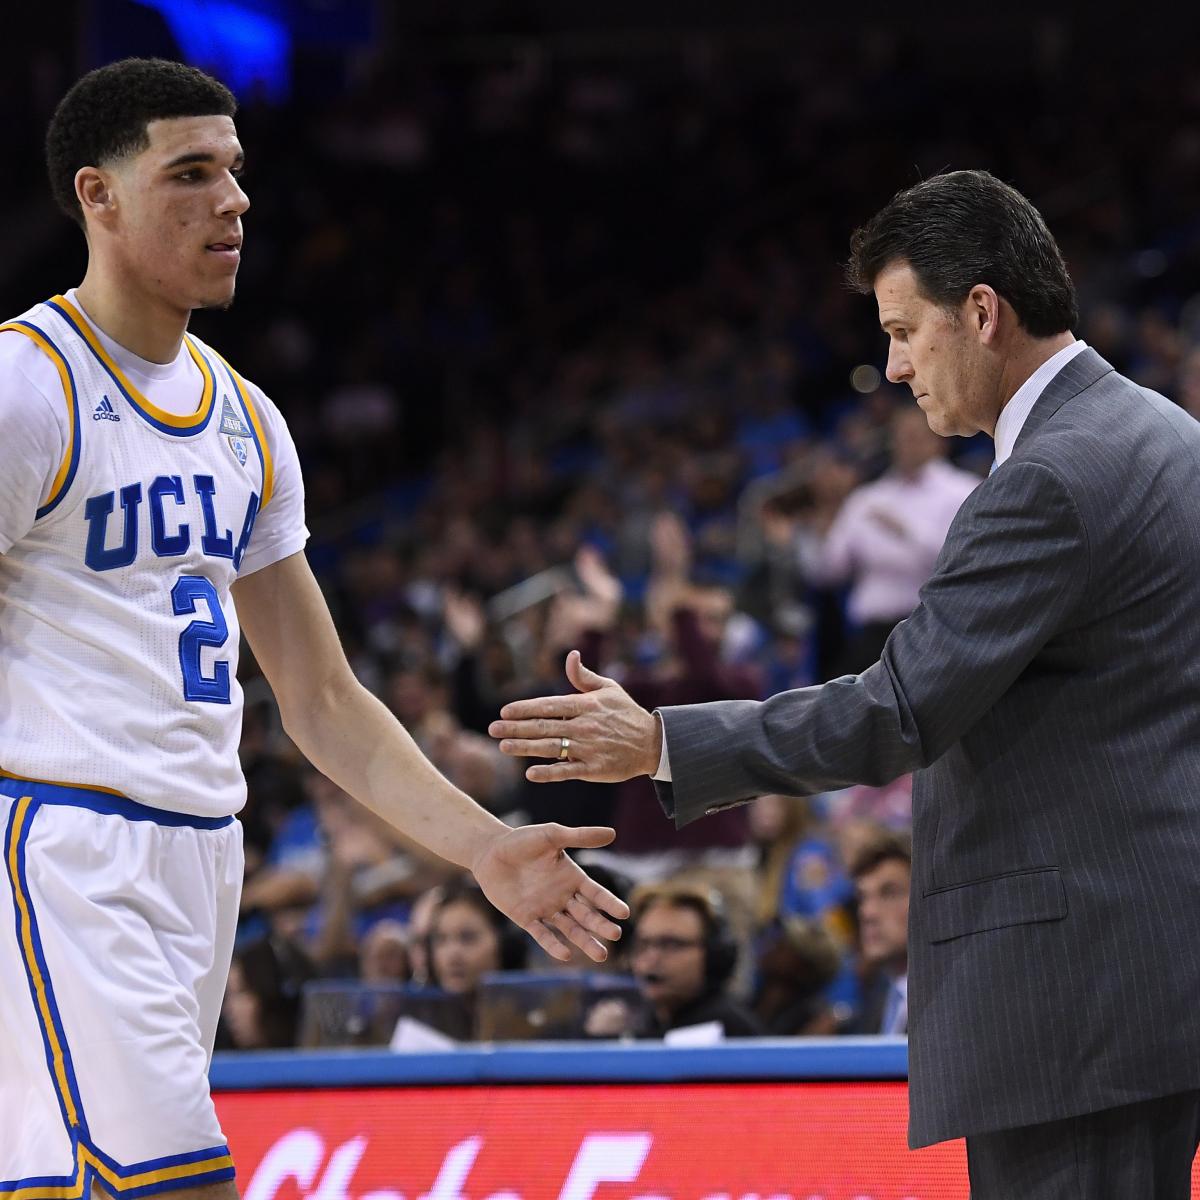 Lonzo Ball Declares for 2017 NBA Draft After Sweet 16 Loss to Kentucky